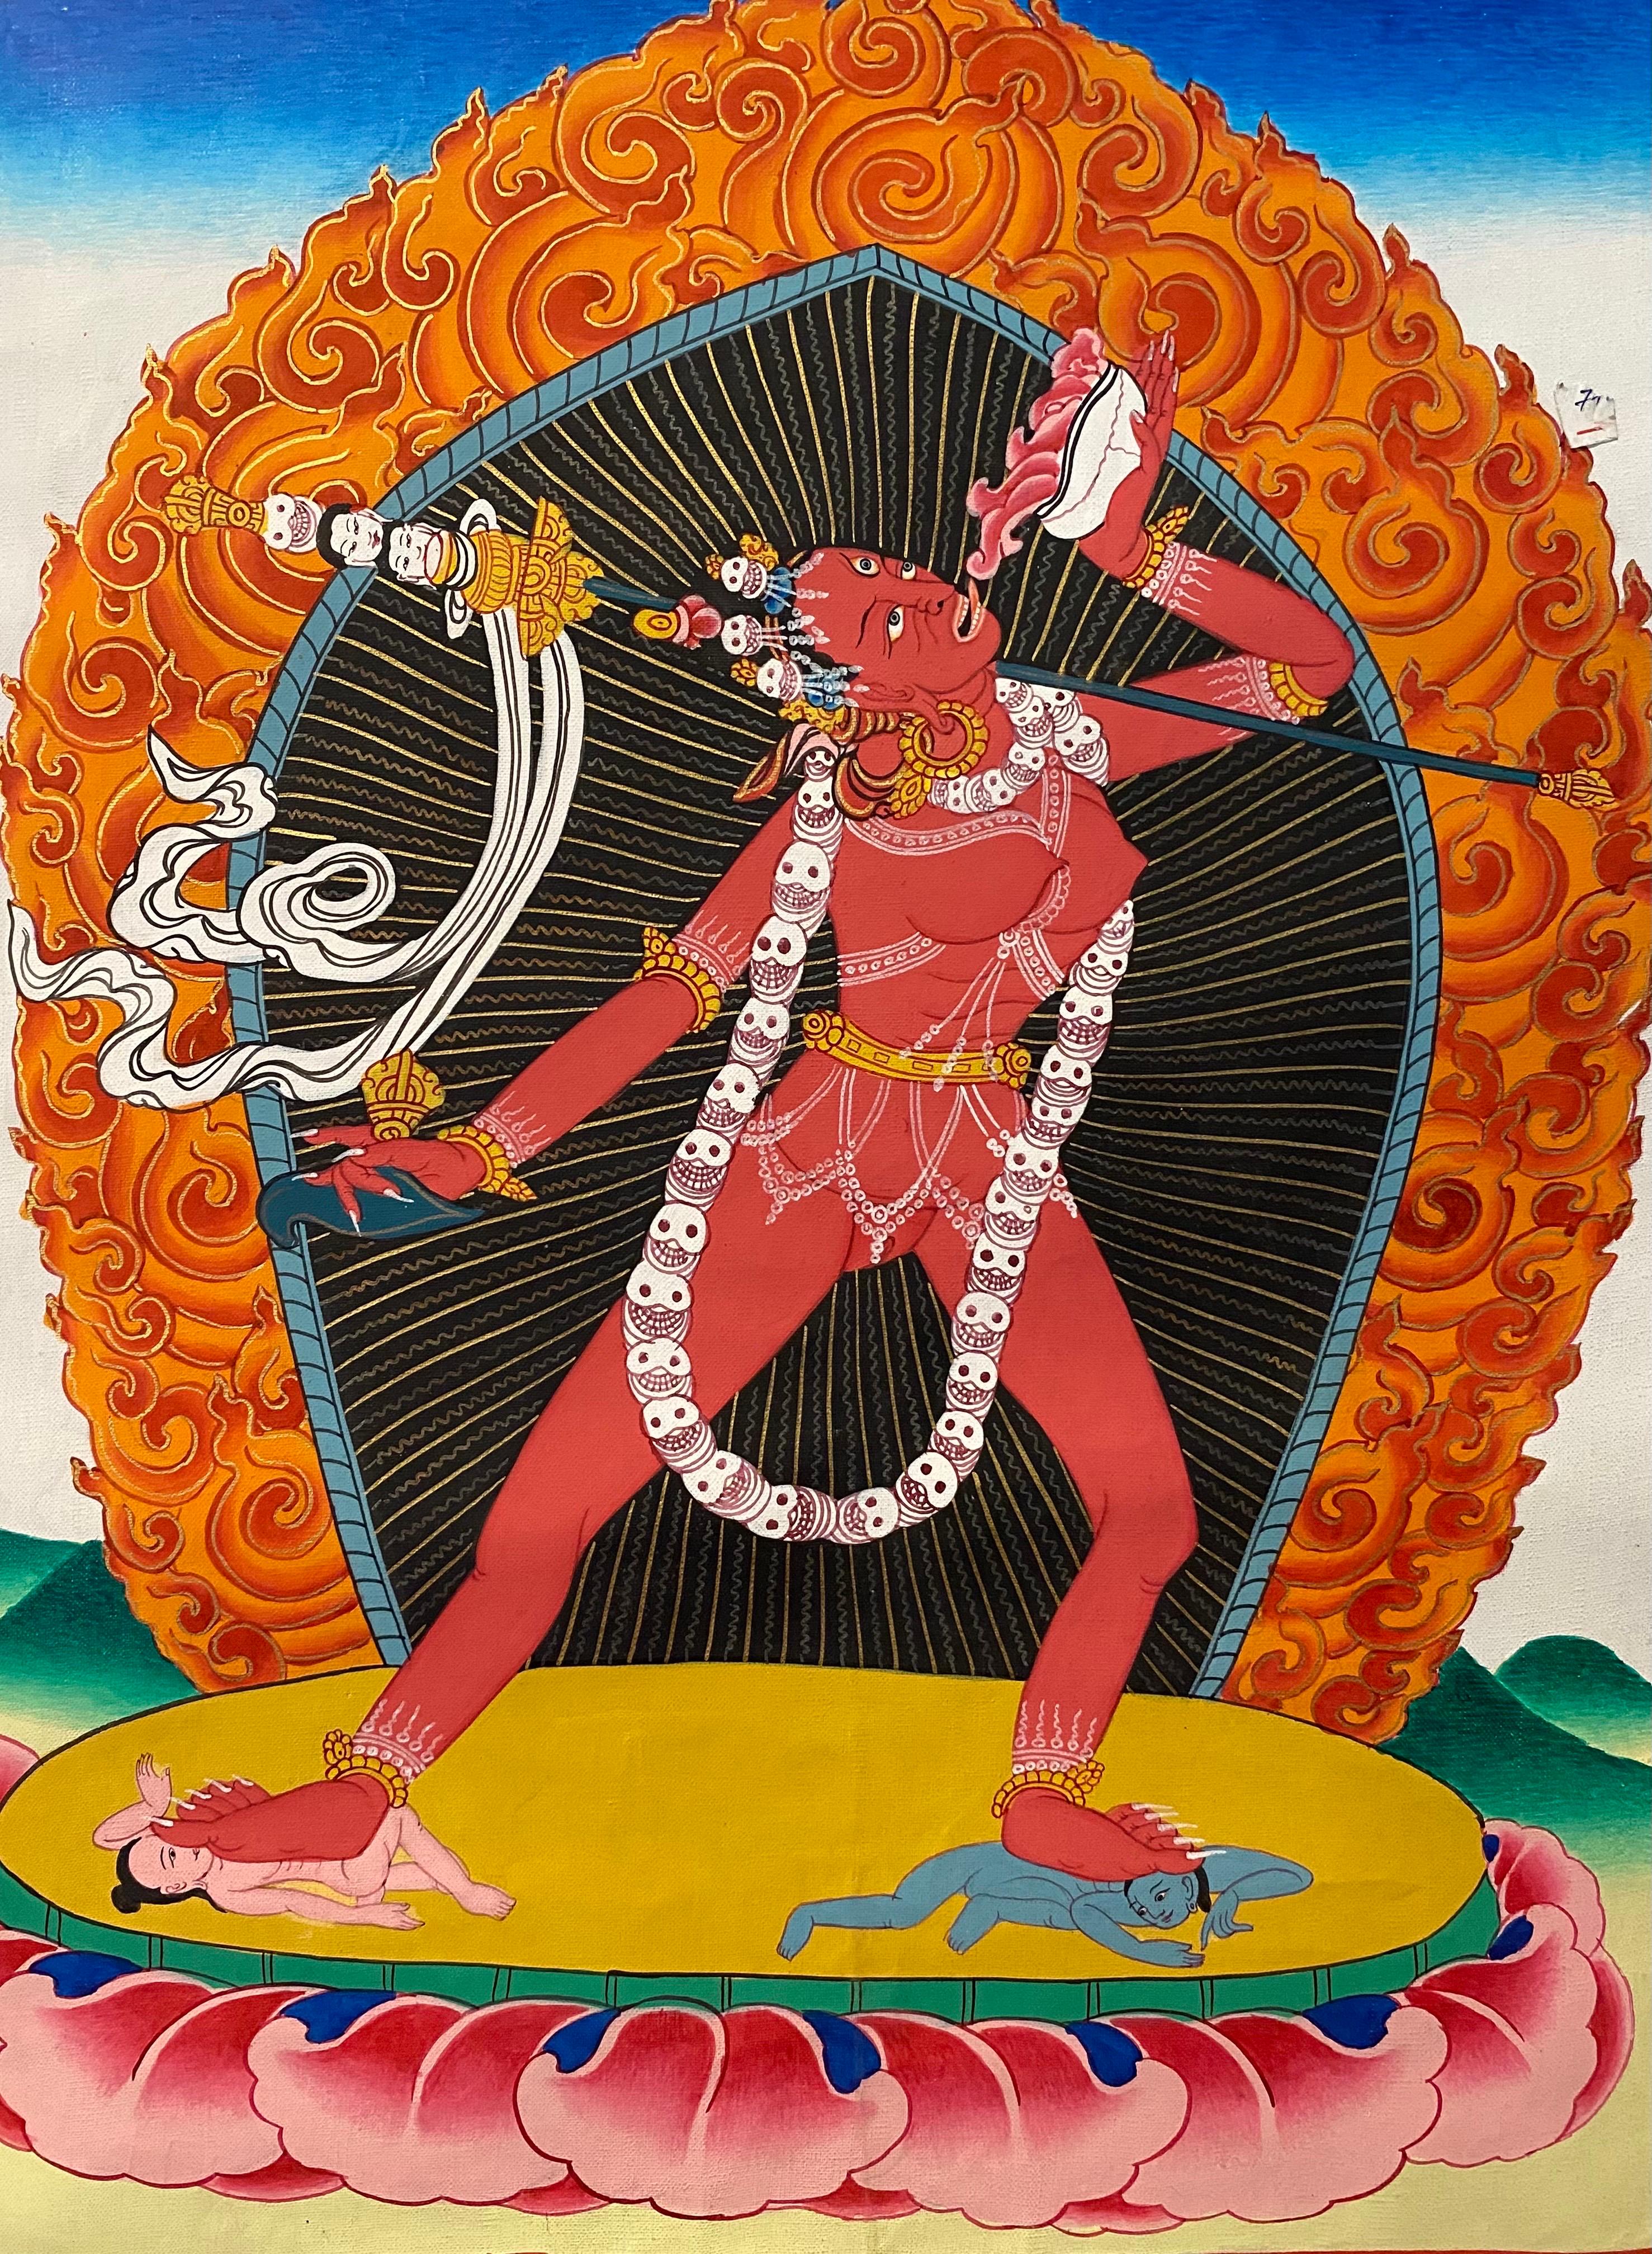 Unframed Hand Painted Dakini/Vajrayogini Thangka on Canvas 24K Gold - Other Art Style Painting by Unknown